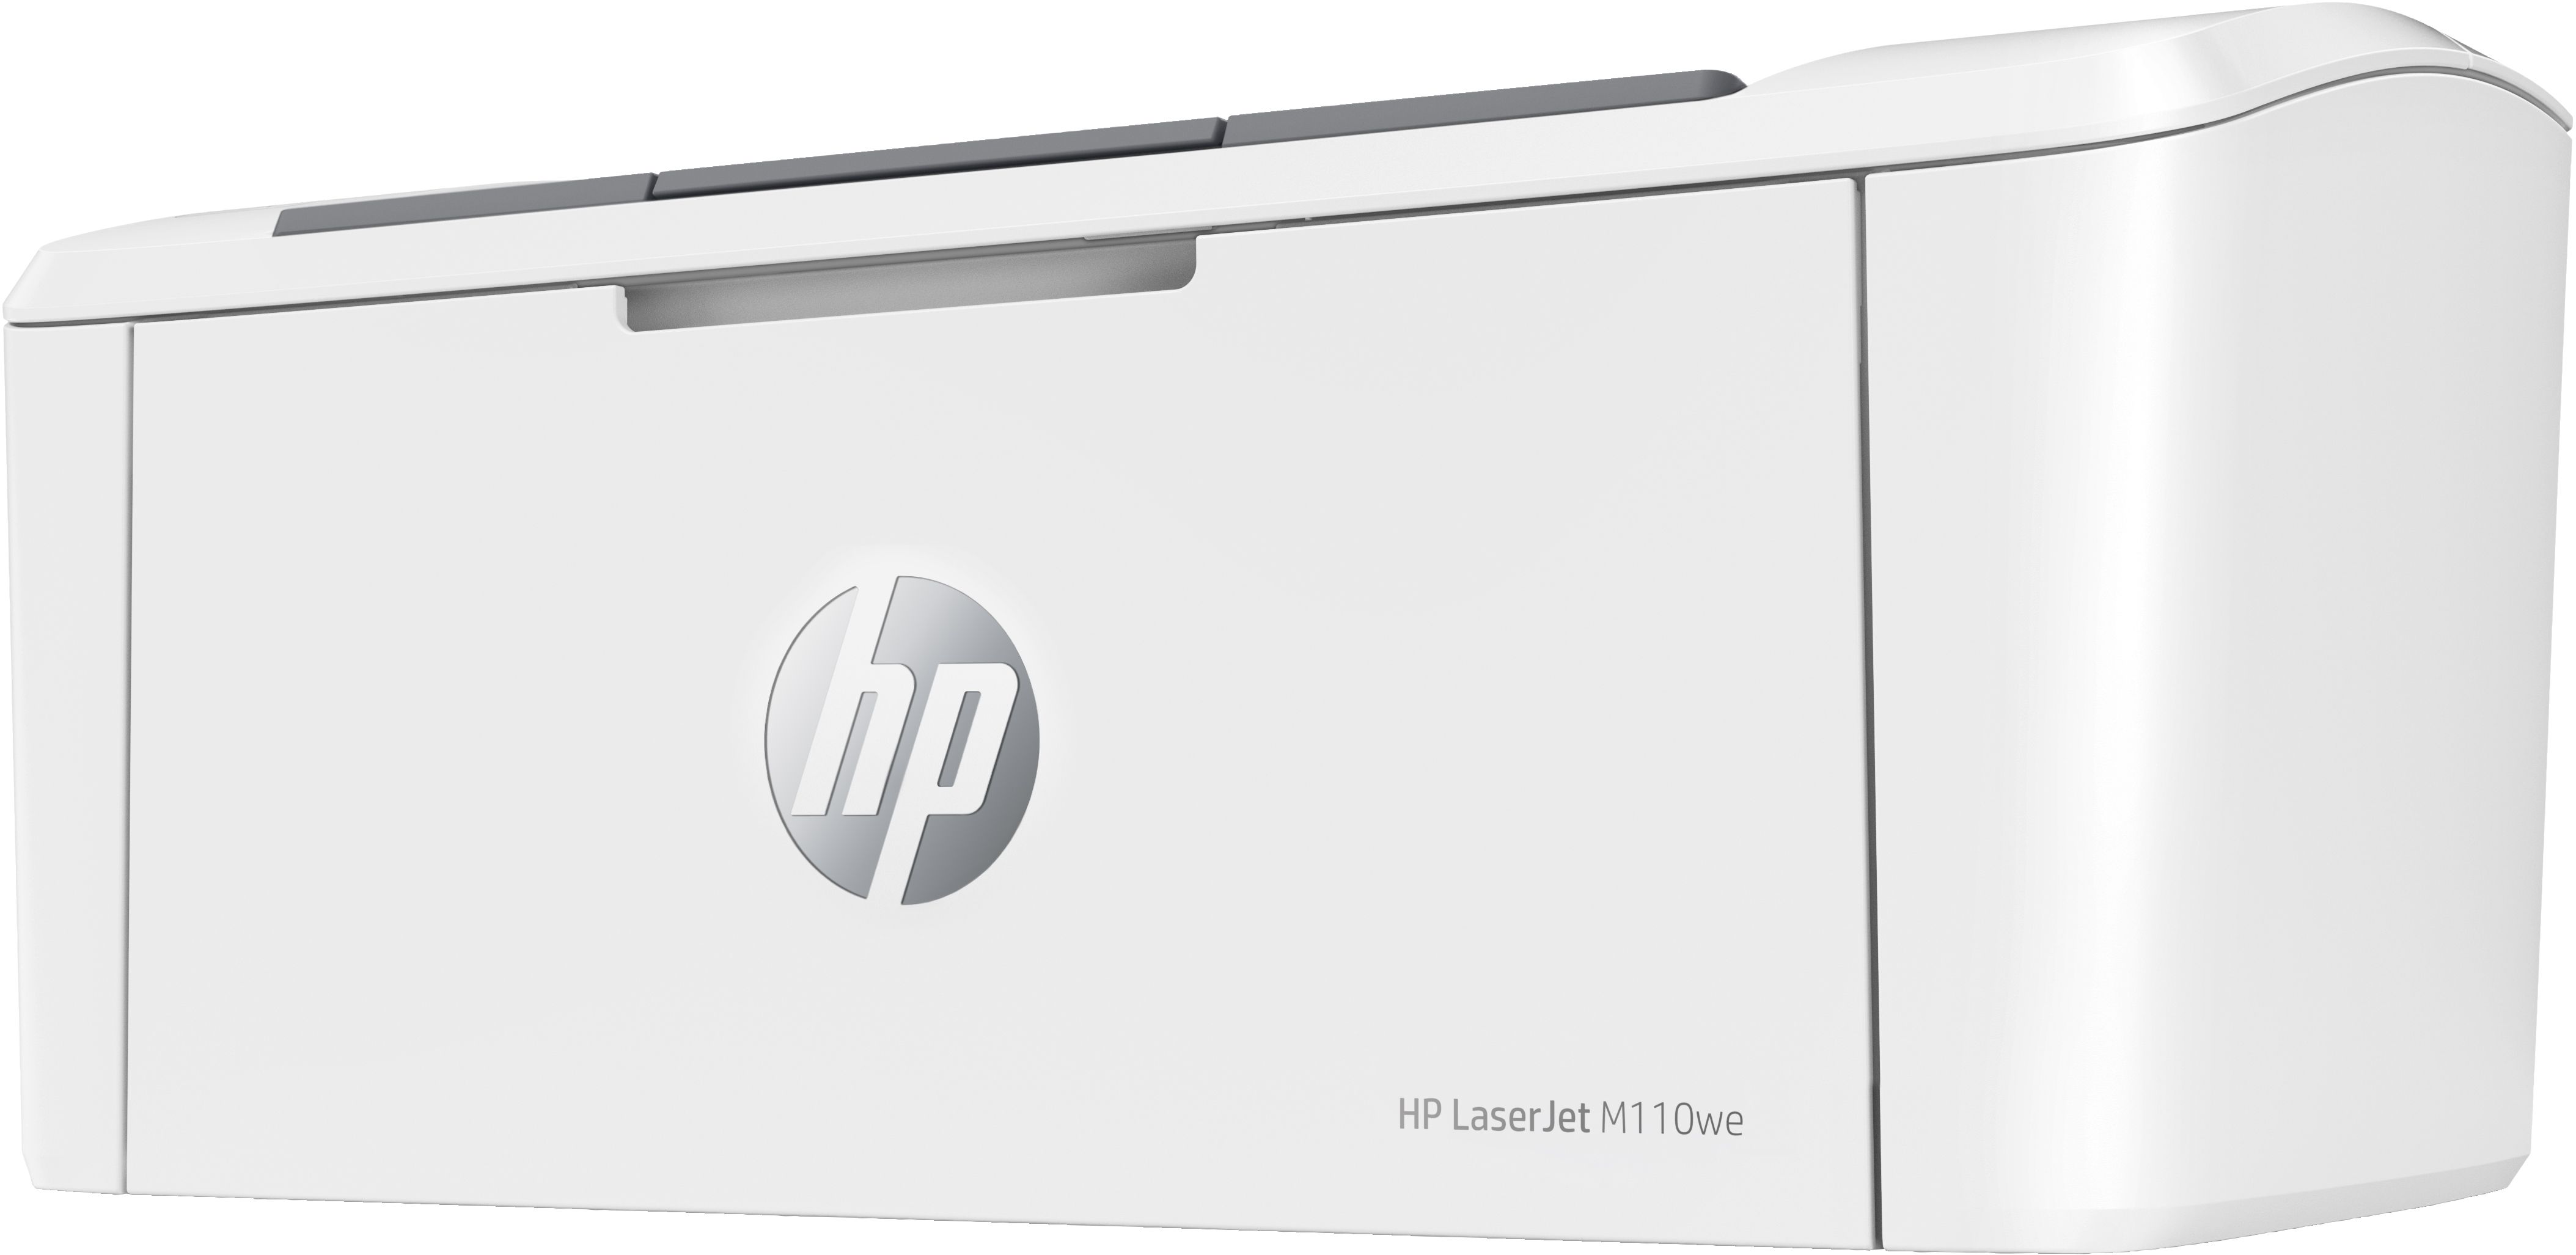 HP LaserJet M110we Printer, Black and white, Printer for Small office, Print, Wireless; +; Instant Ink eligible_3